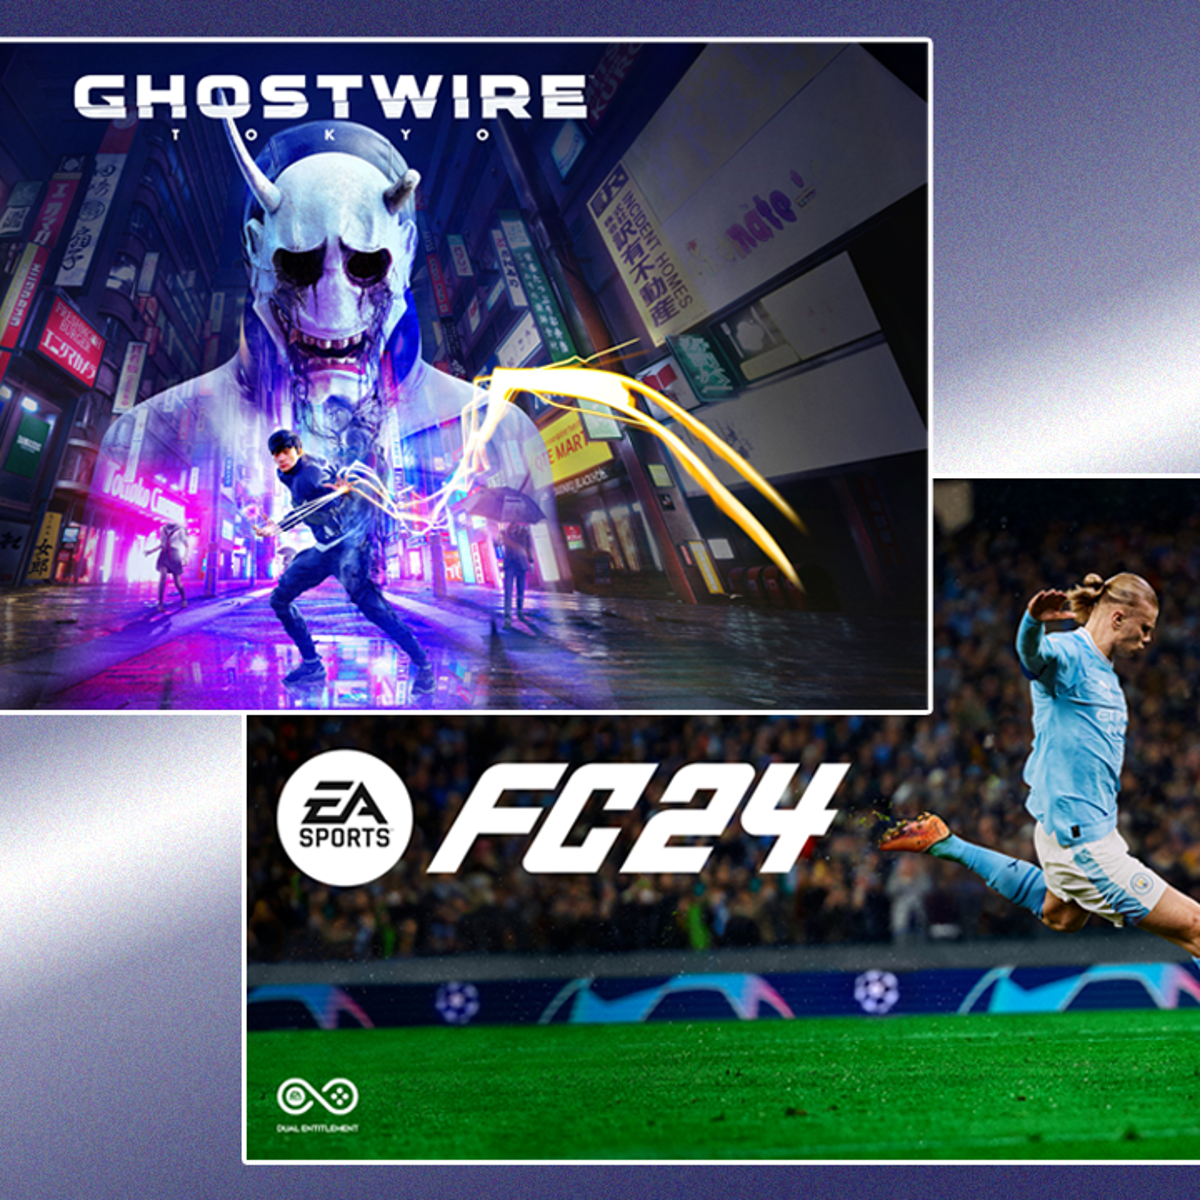 Prime Gaming October Content Update: Ghostwire: Tokyo, GRUNND